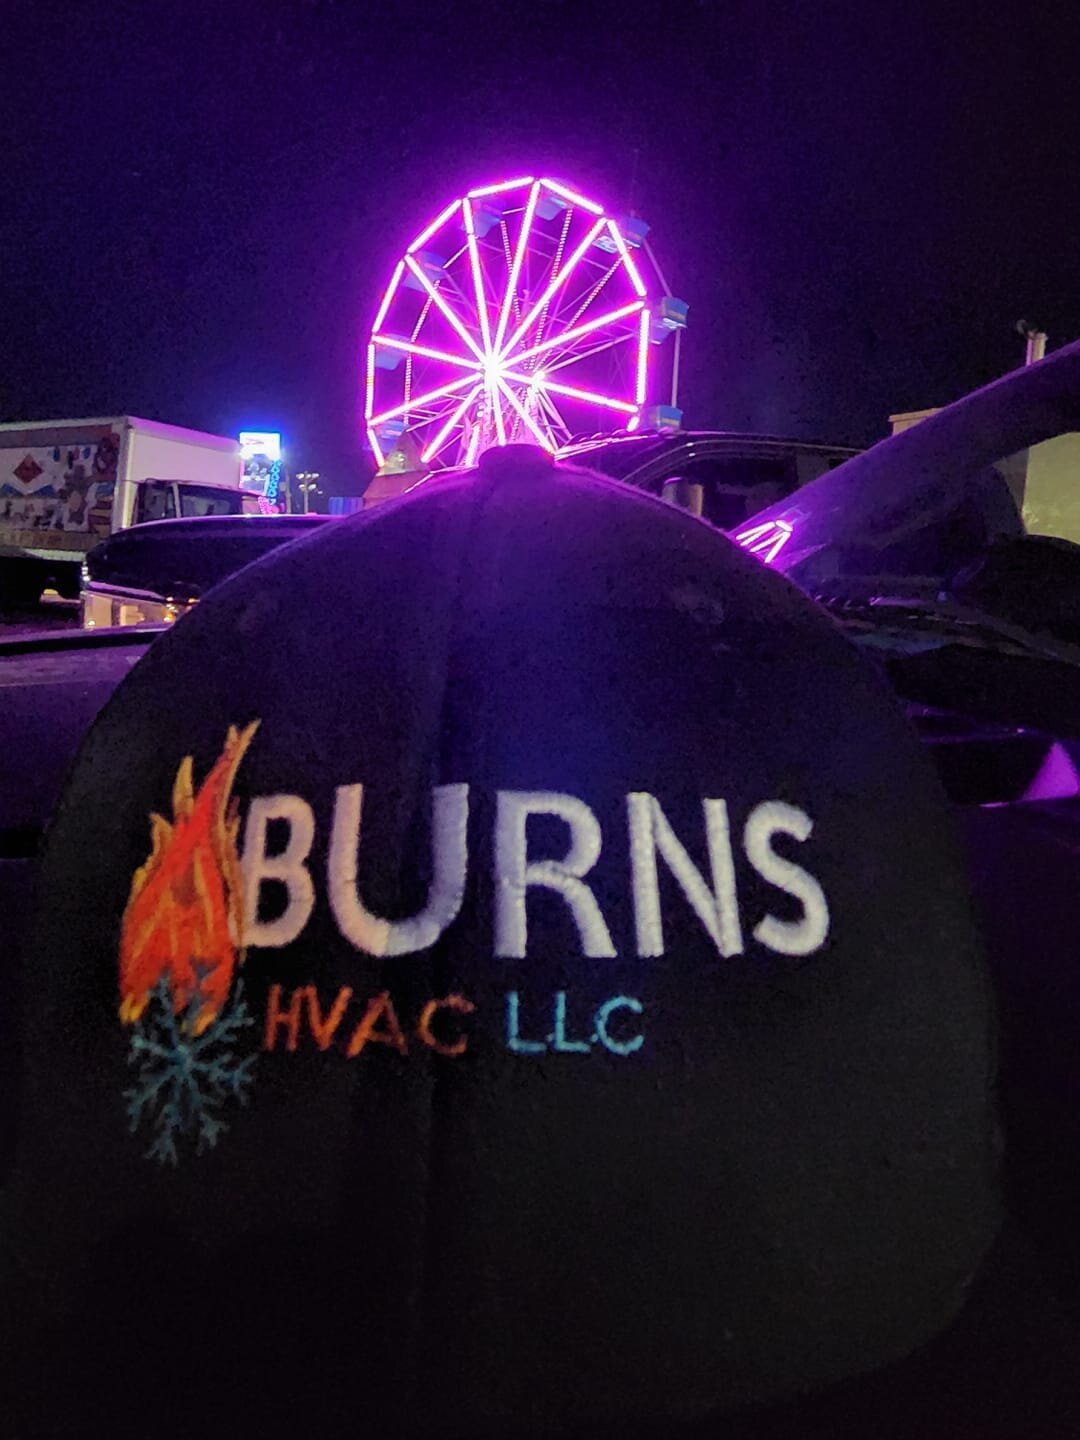 https://www.facebook.com/groups/2026347360884055/?ref=share
 If you have a second please like our group we started. This group will involve discussing business, life, and referrals for the group of contractors Burns HVAC LLC uses. It will be the star